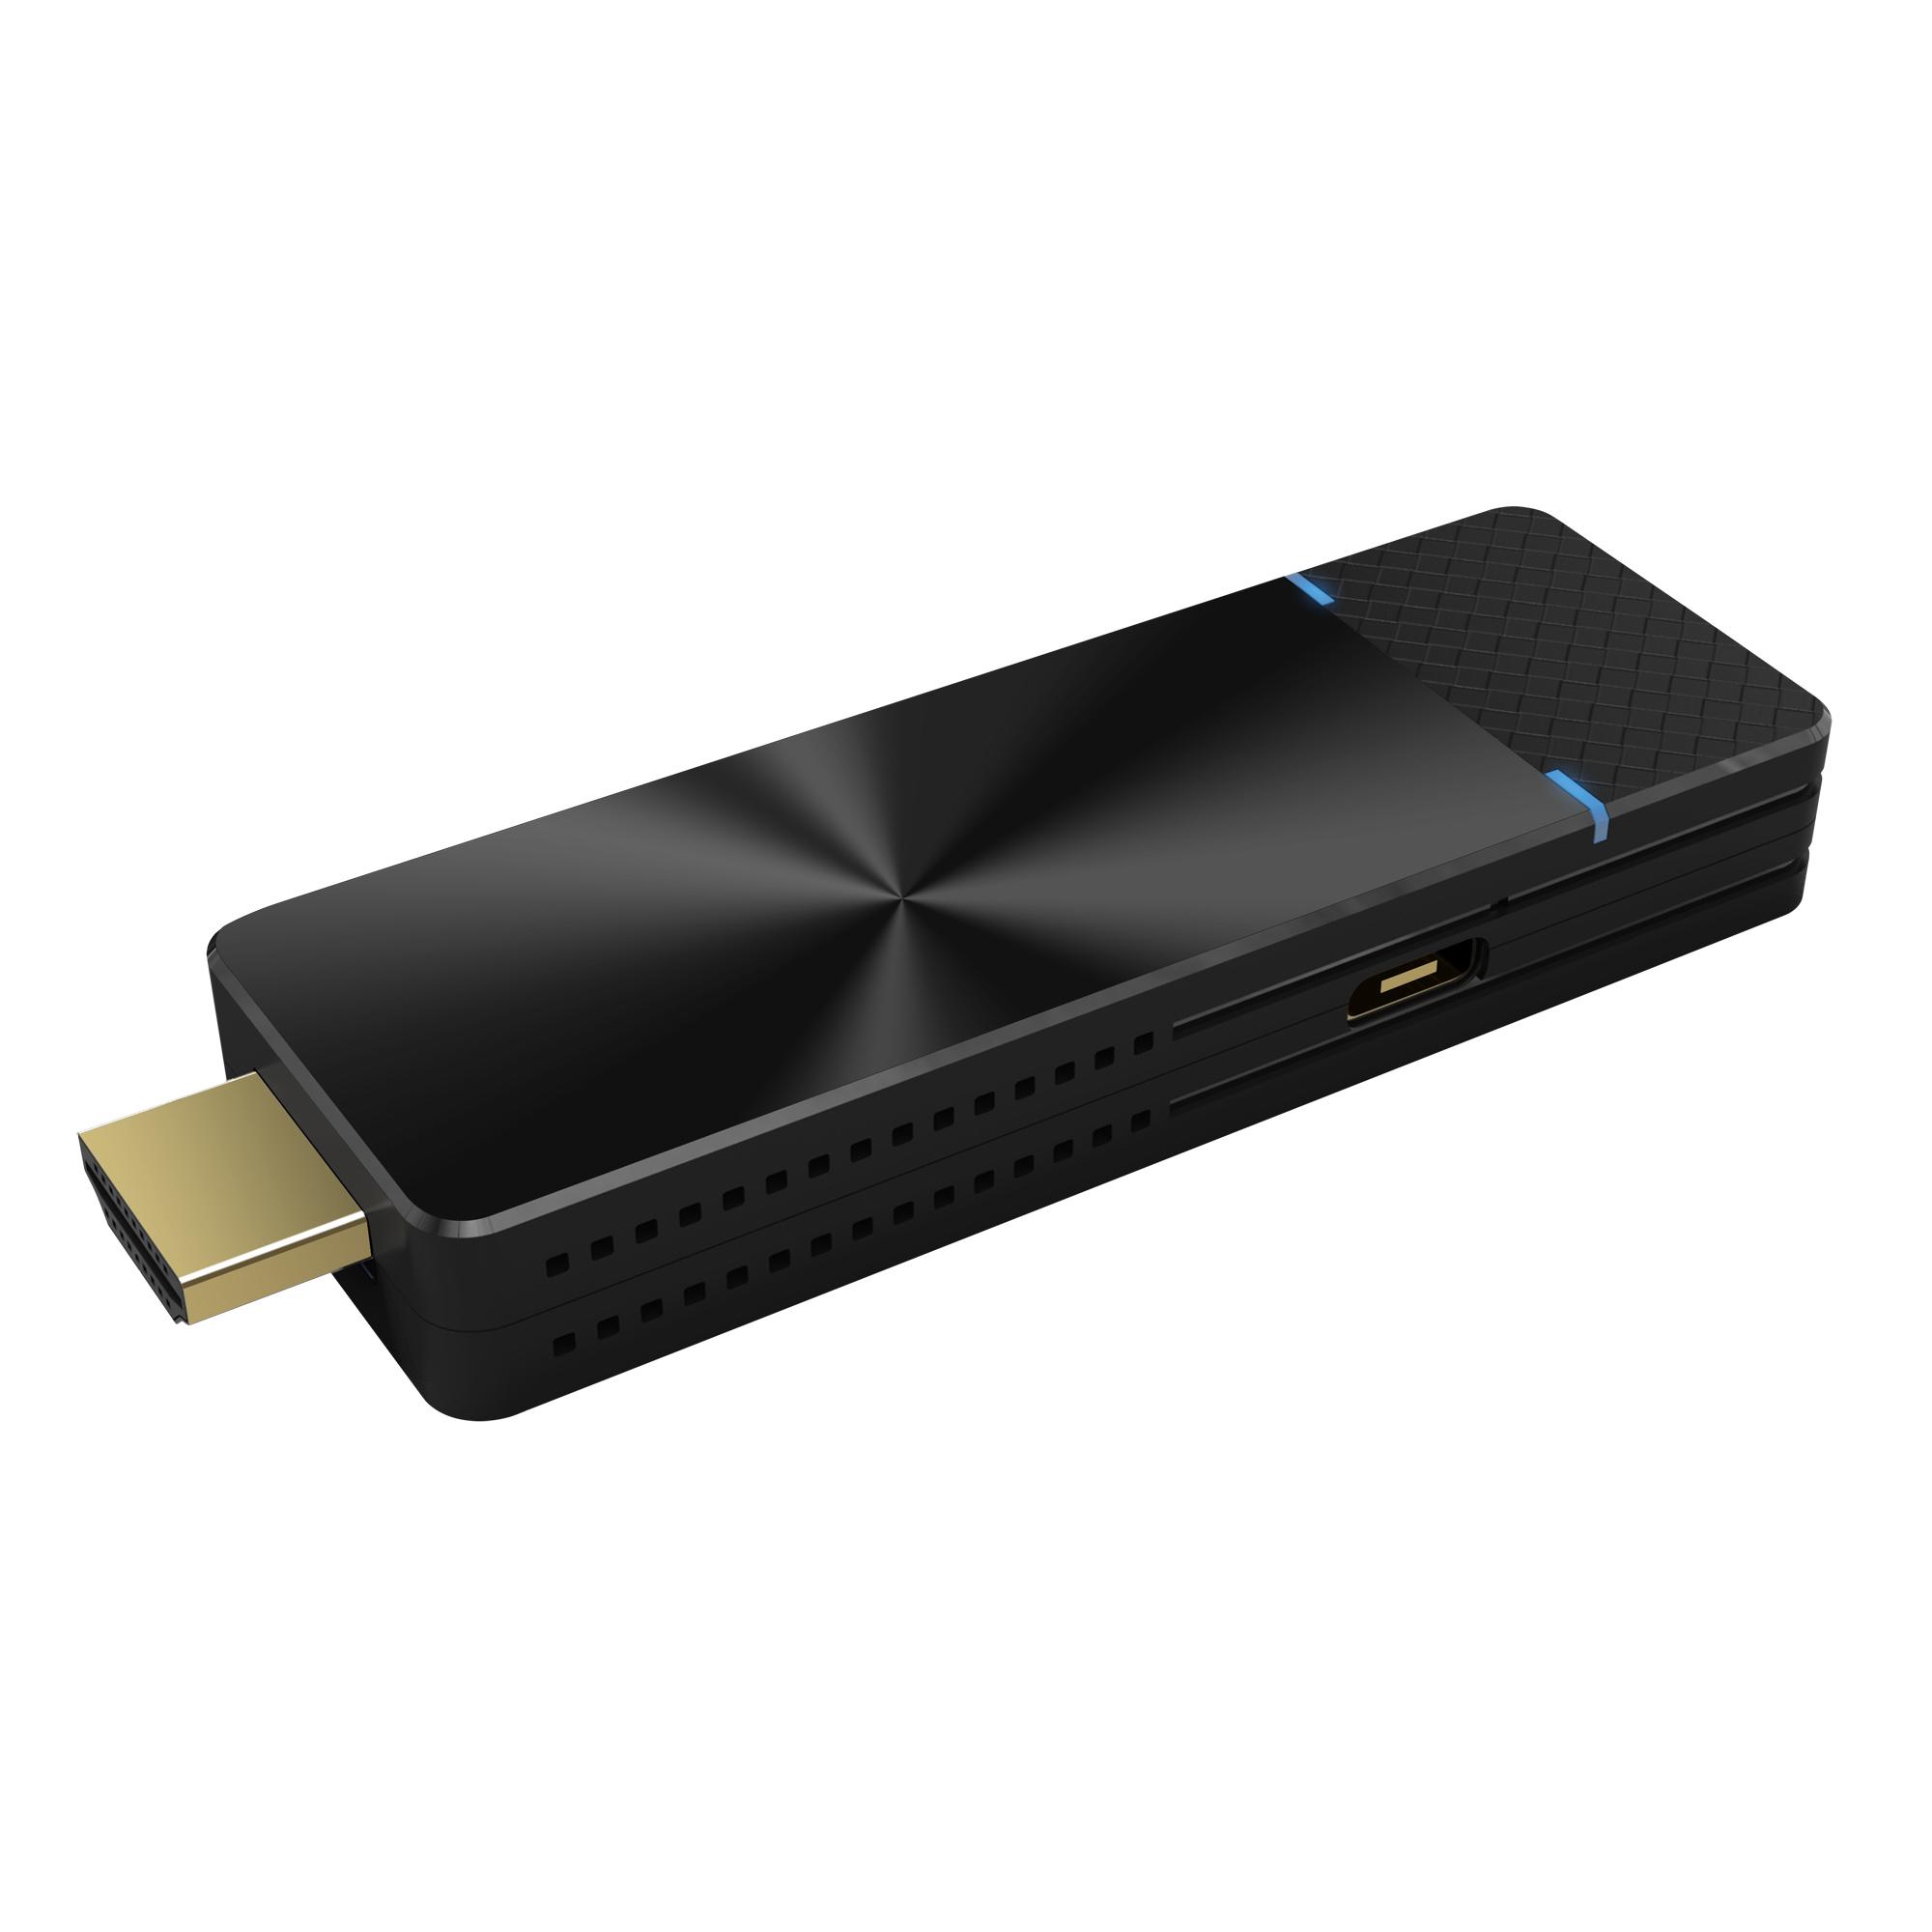 Eventyrer Fatal Modsatte EZ-PD2 - Multi-screen wireless presentation receiver. 5 GHz Wi-Fi support  with 4K capability.